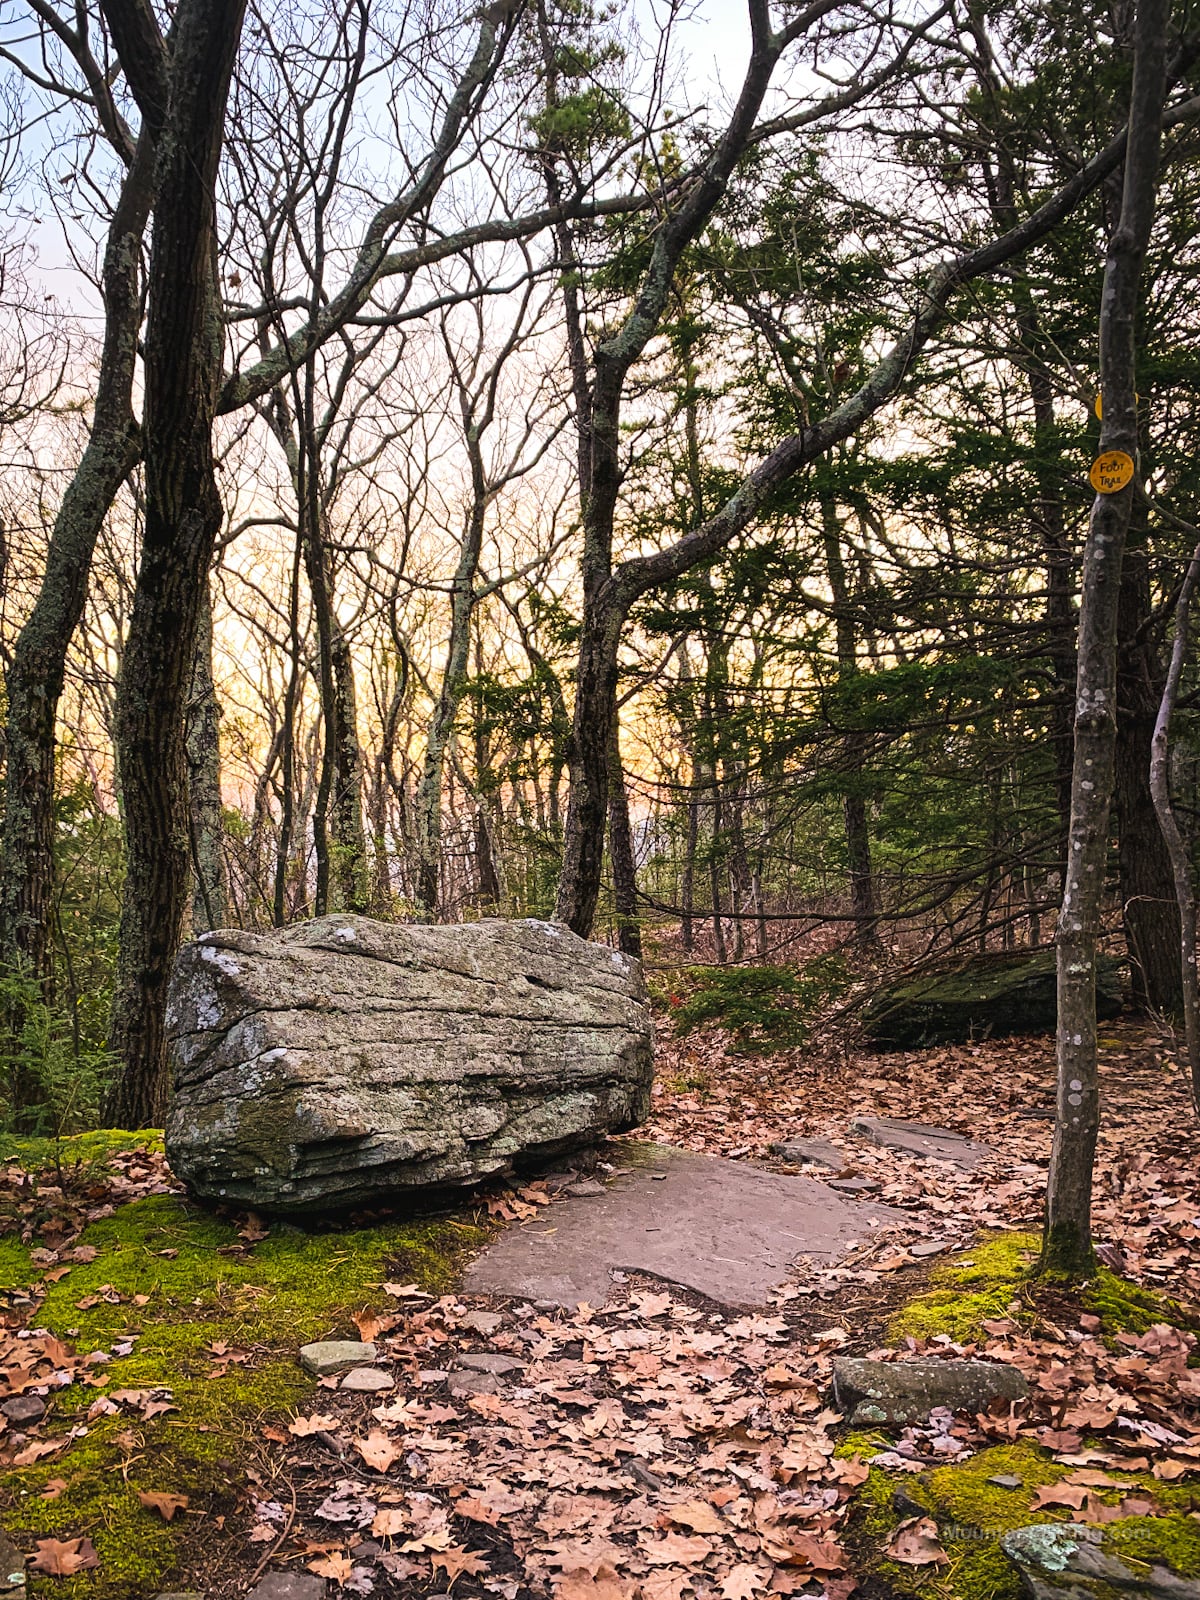 Huckleberry Point Trail: glacial erratic in woods